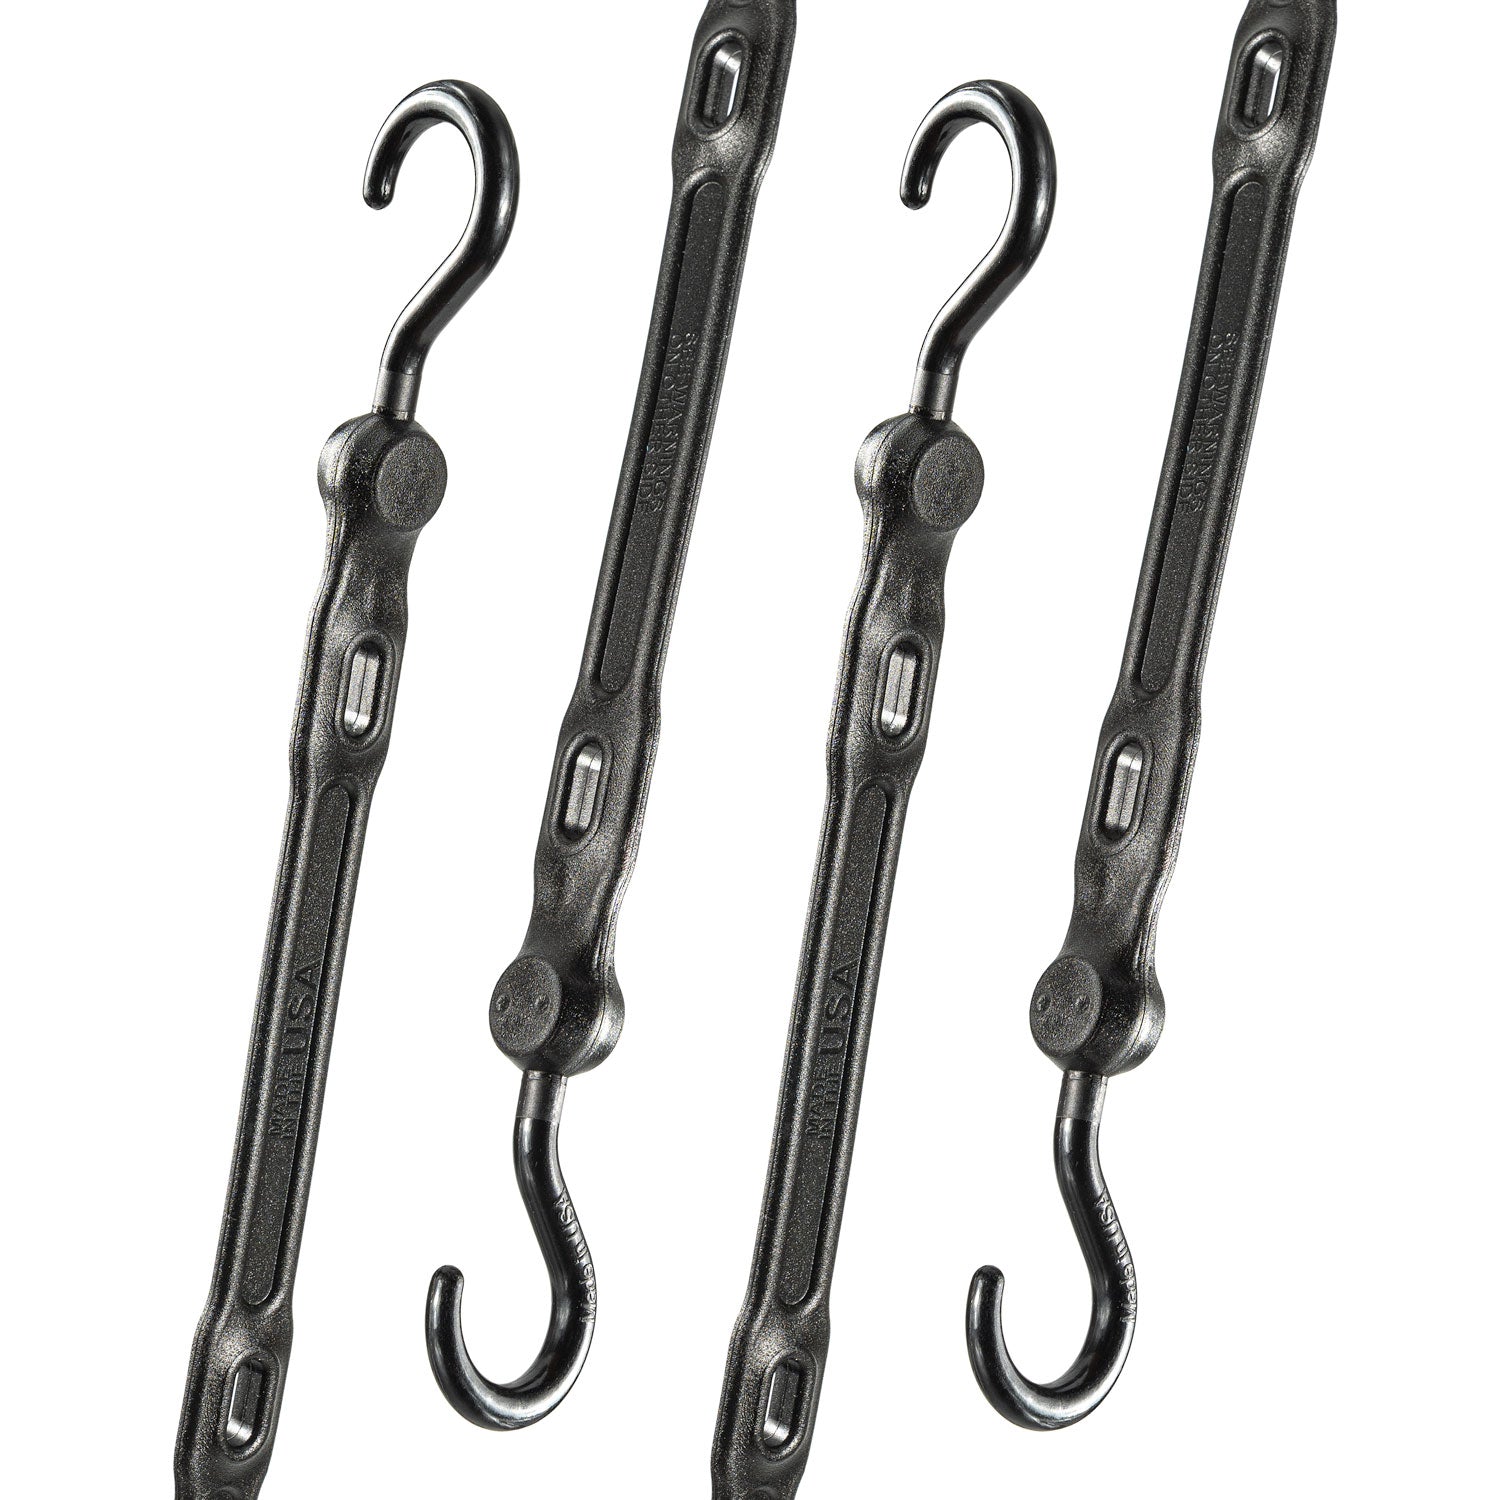 36" Adjust-A-Strap Adjustable Bungee Strap 4 Pack - The Perfect Bungee & ShockStrap Tie Downs